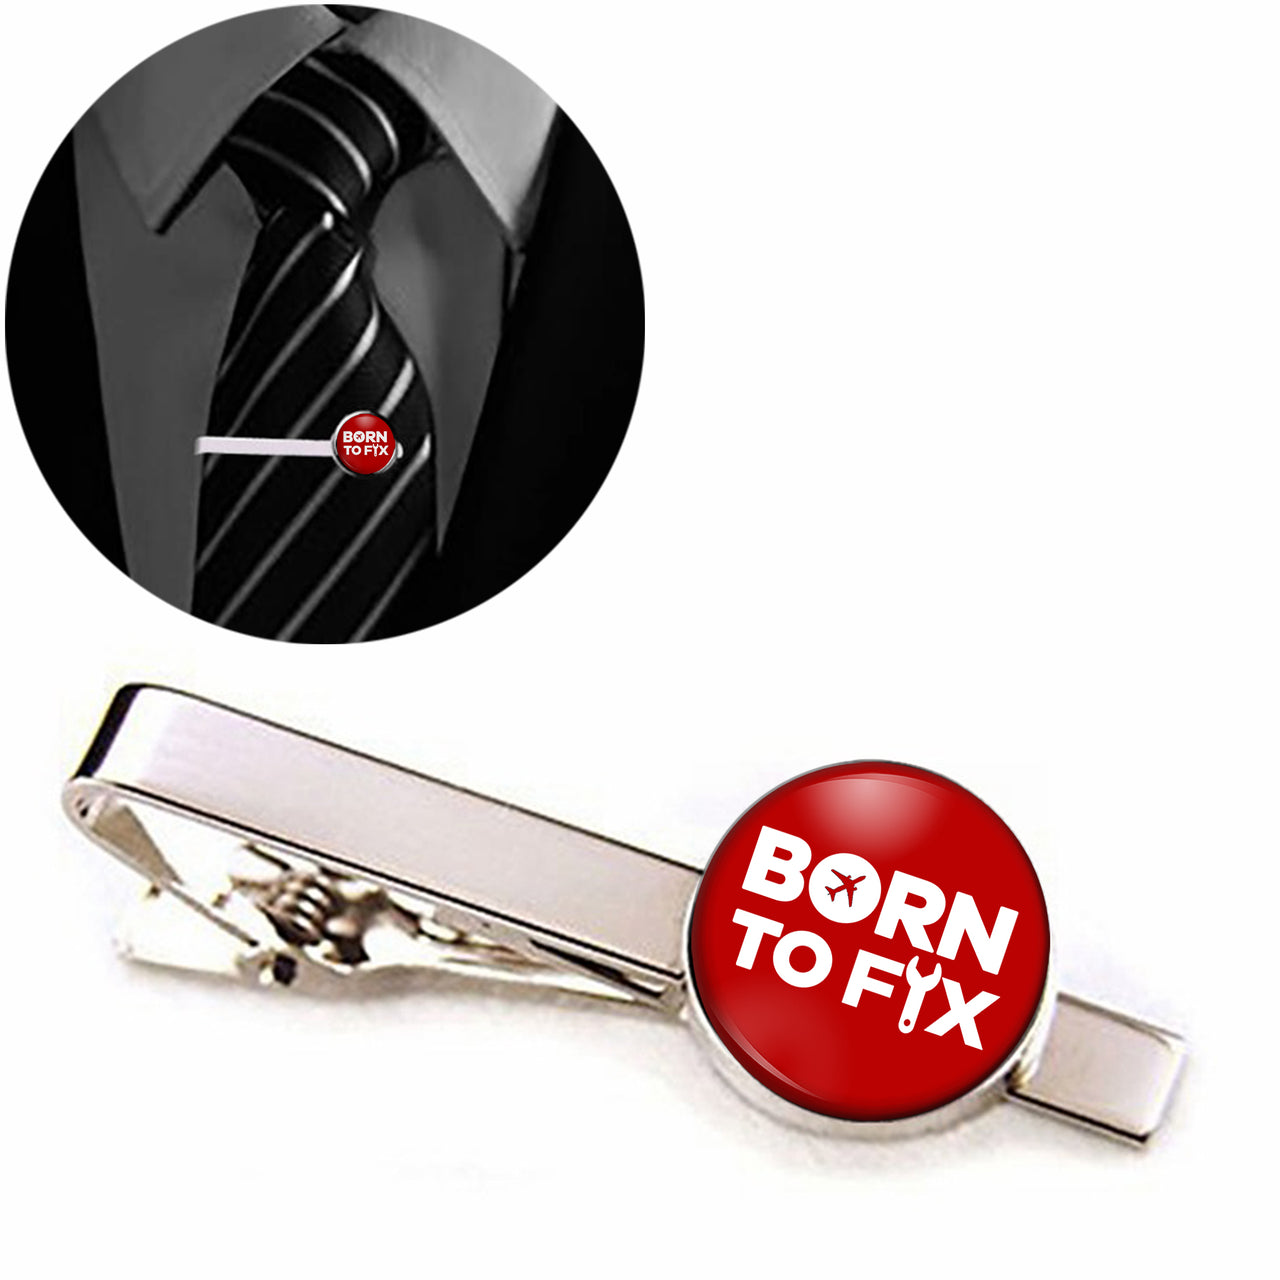 Born To Fix Airplanes Designed Tie Clips